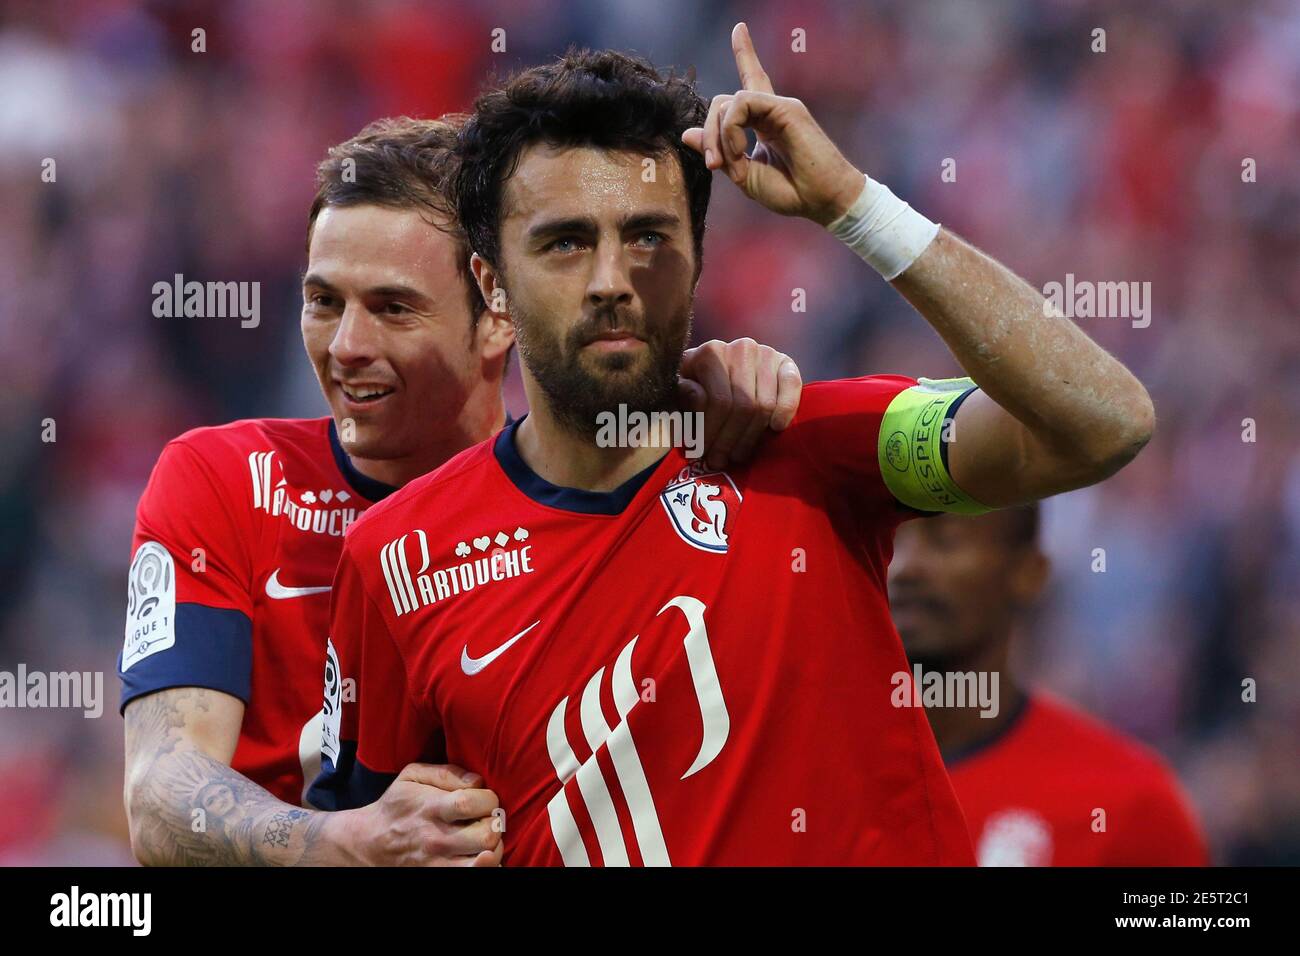 Lille's Marko Basa (R) celebrates with team-mate Nolan Roux his goal during  their French Ligue 1 soccer match against Montpellier at Pierre Mauroy  Stadium in Villeneuve d'Ascq March 9, 2014. REUTERS/Pascal Rossignol (